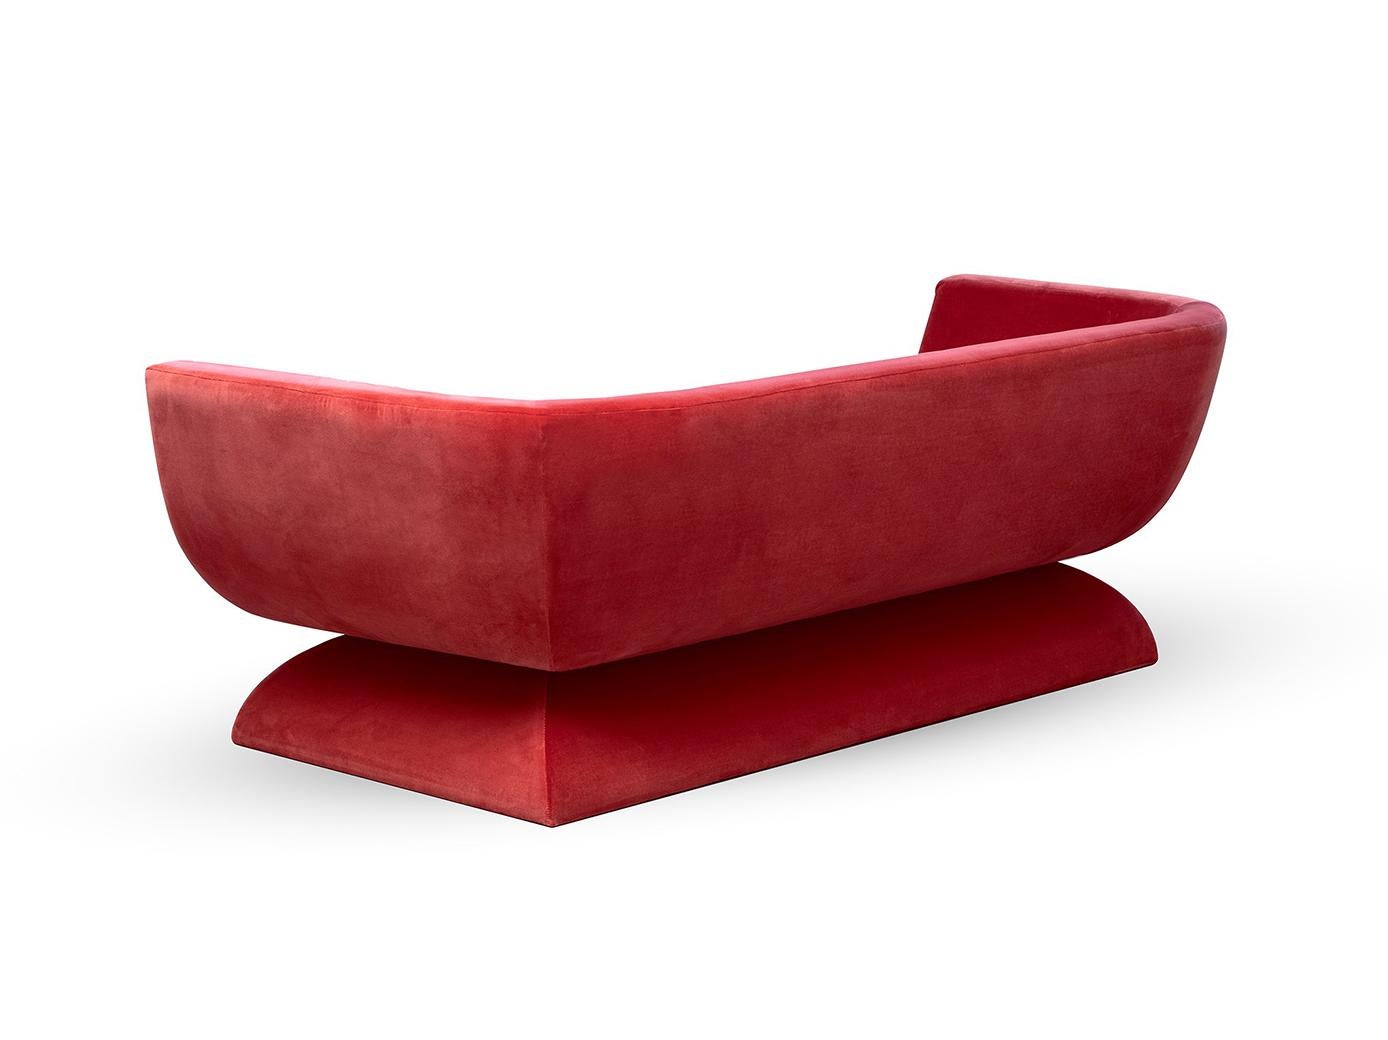 Oscar sofa

Inspired by the curved lines poetry of Oscar Niemeyer’s architecture, Oscar sofa allures for its sensual and free-flowing curves. Like Niemeyer once said “Curves make up the entire Universe” as this contemporary sofa will surely make up